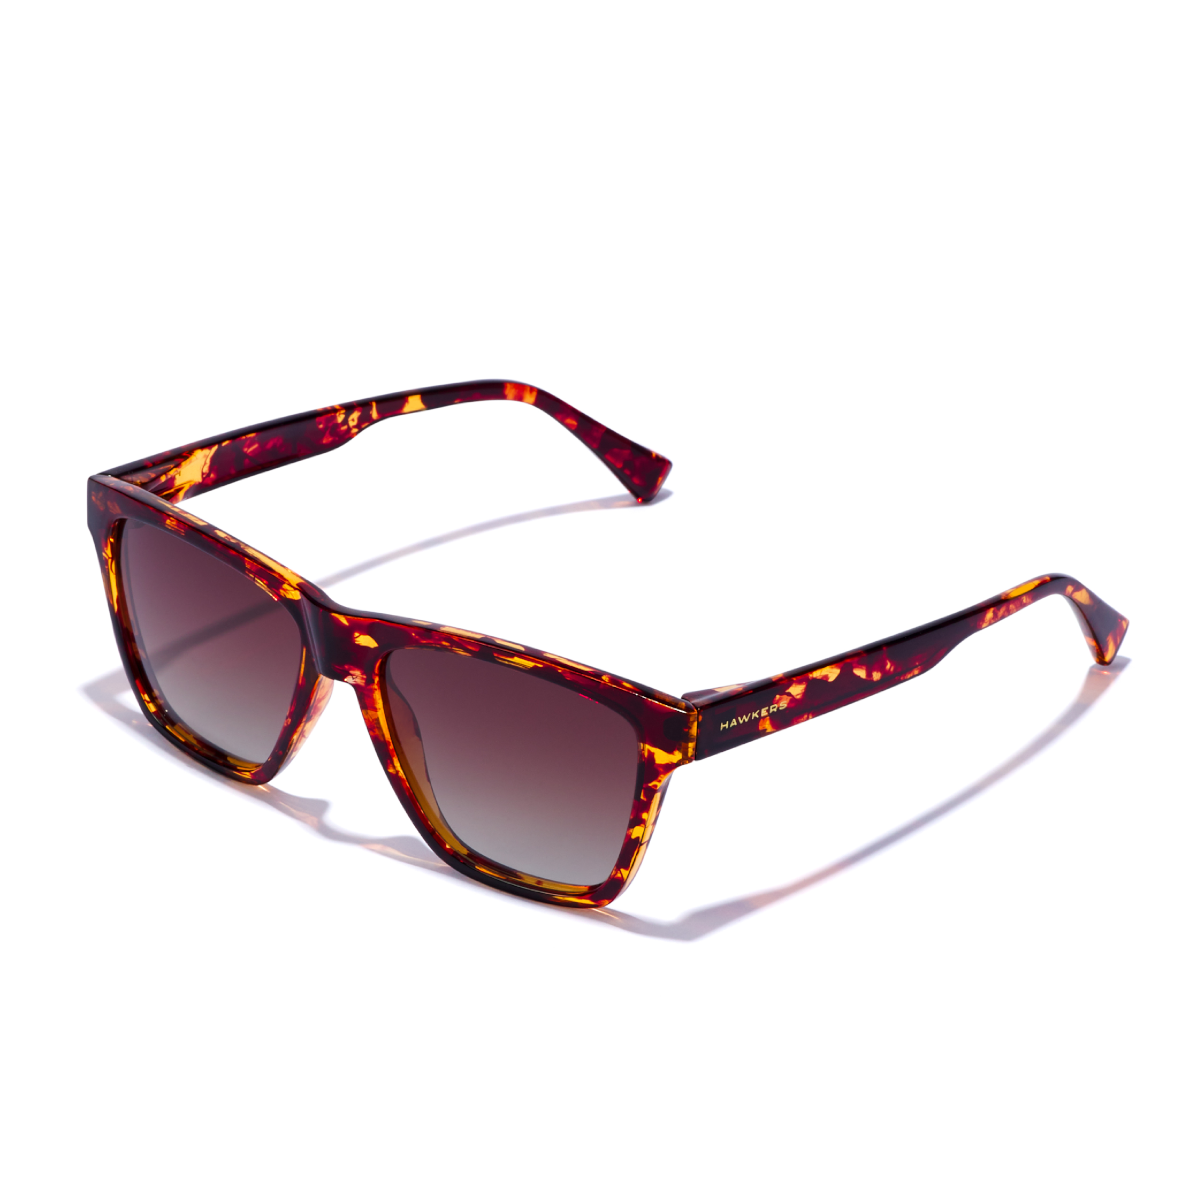 One Ls Rodeo - Polarized Carey Brown